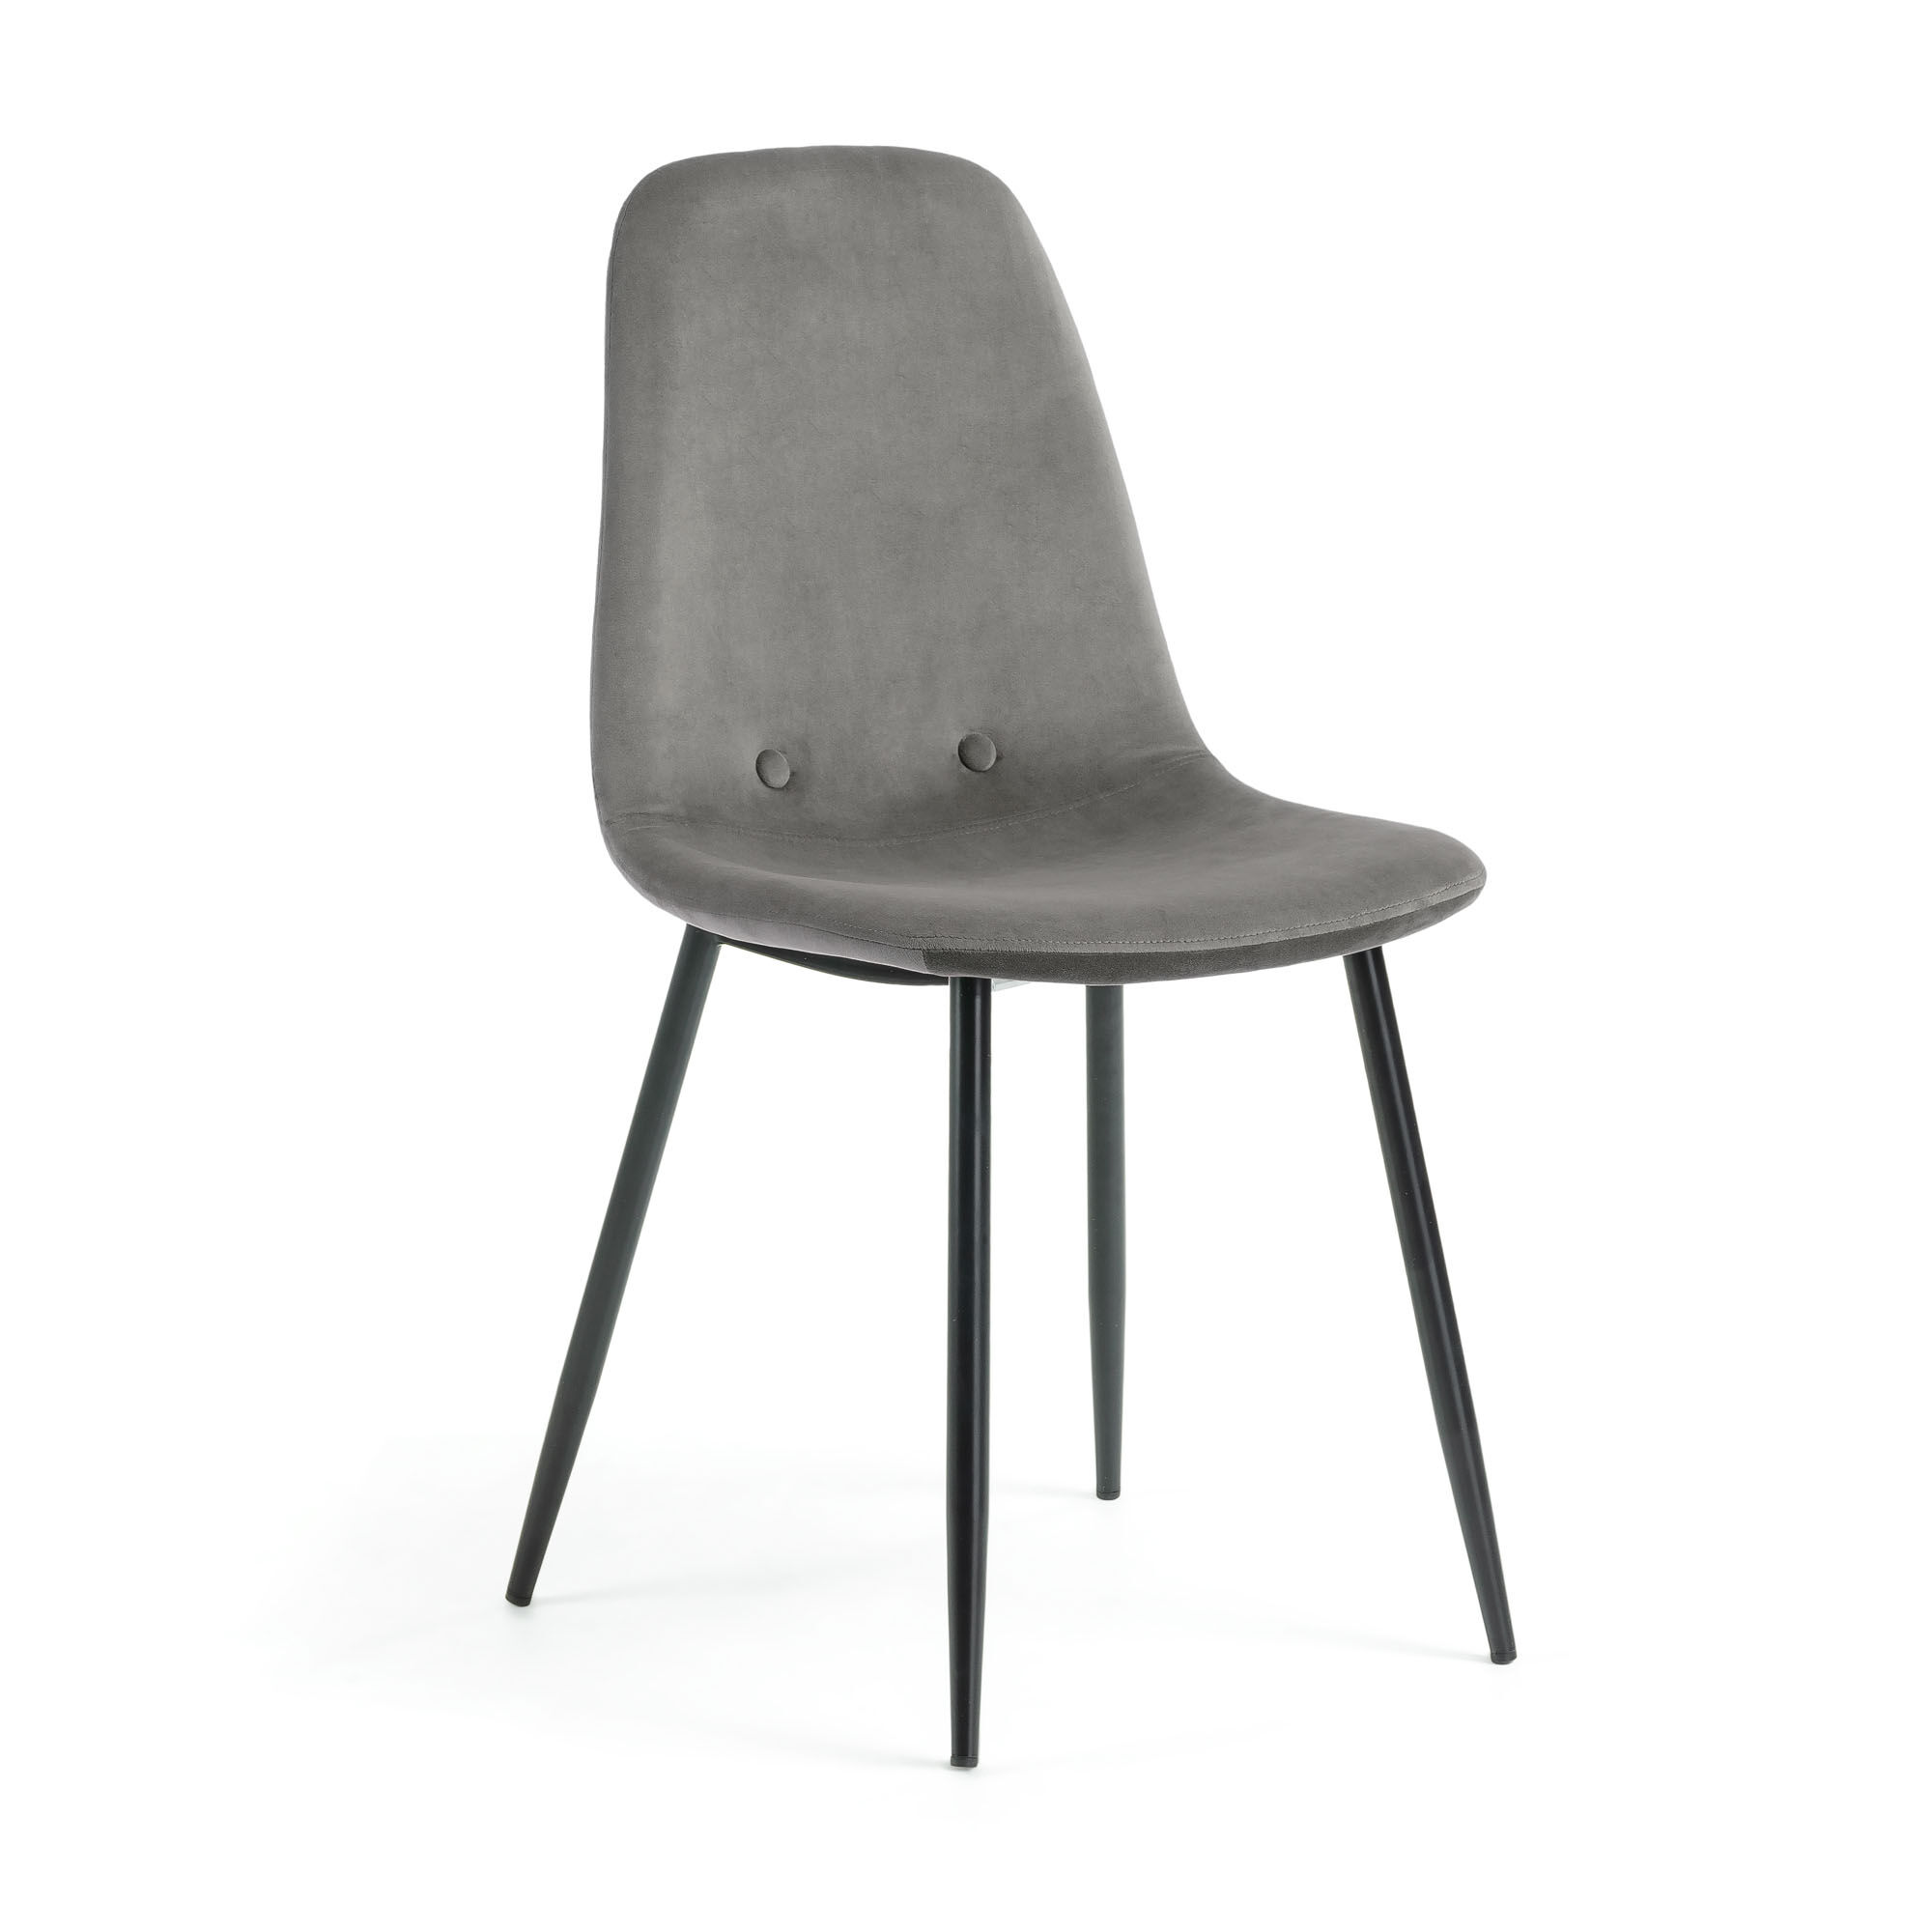 Kave Home Yaren grey velvet chair with steel legs with black finish